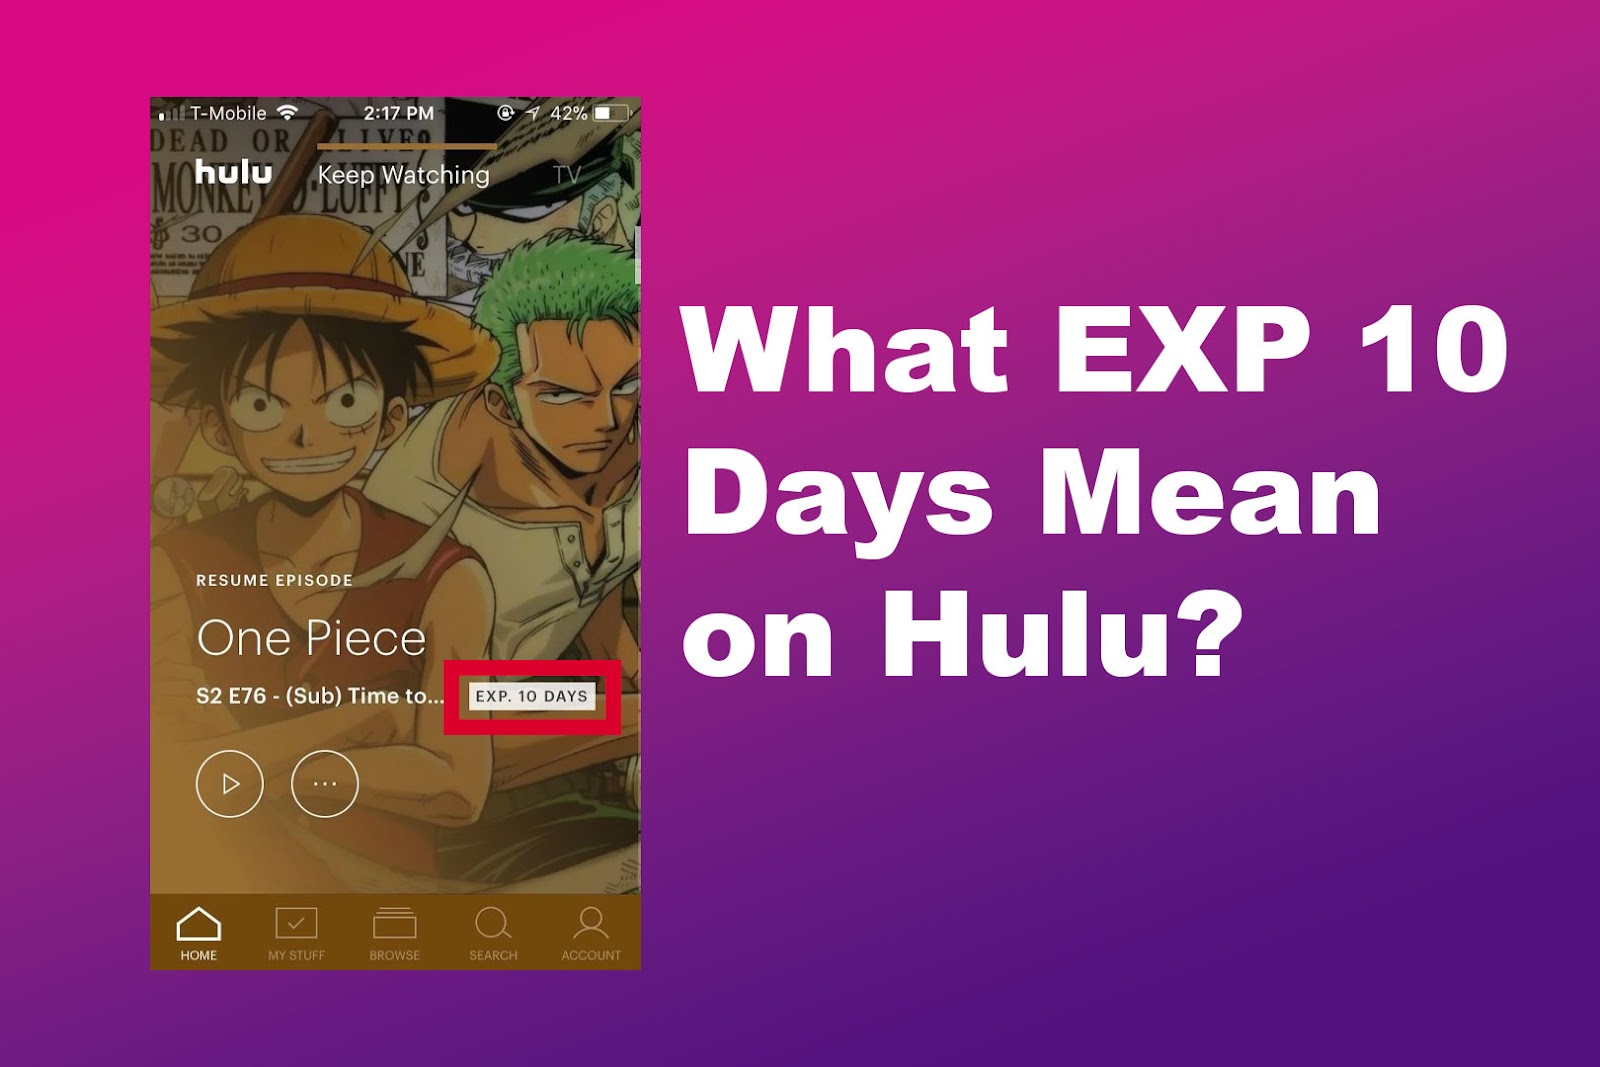 What EXP 10 Days Mean on Hulu